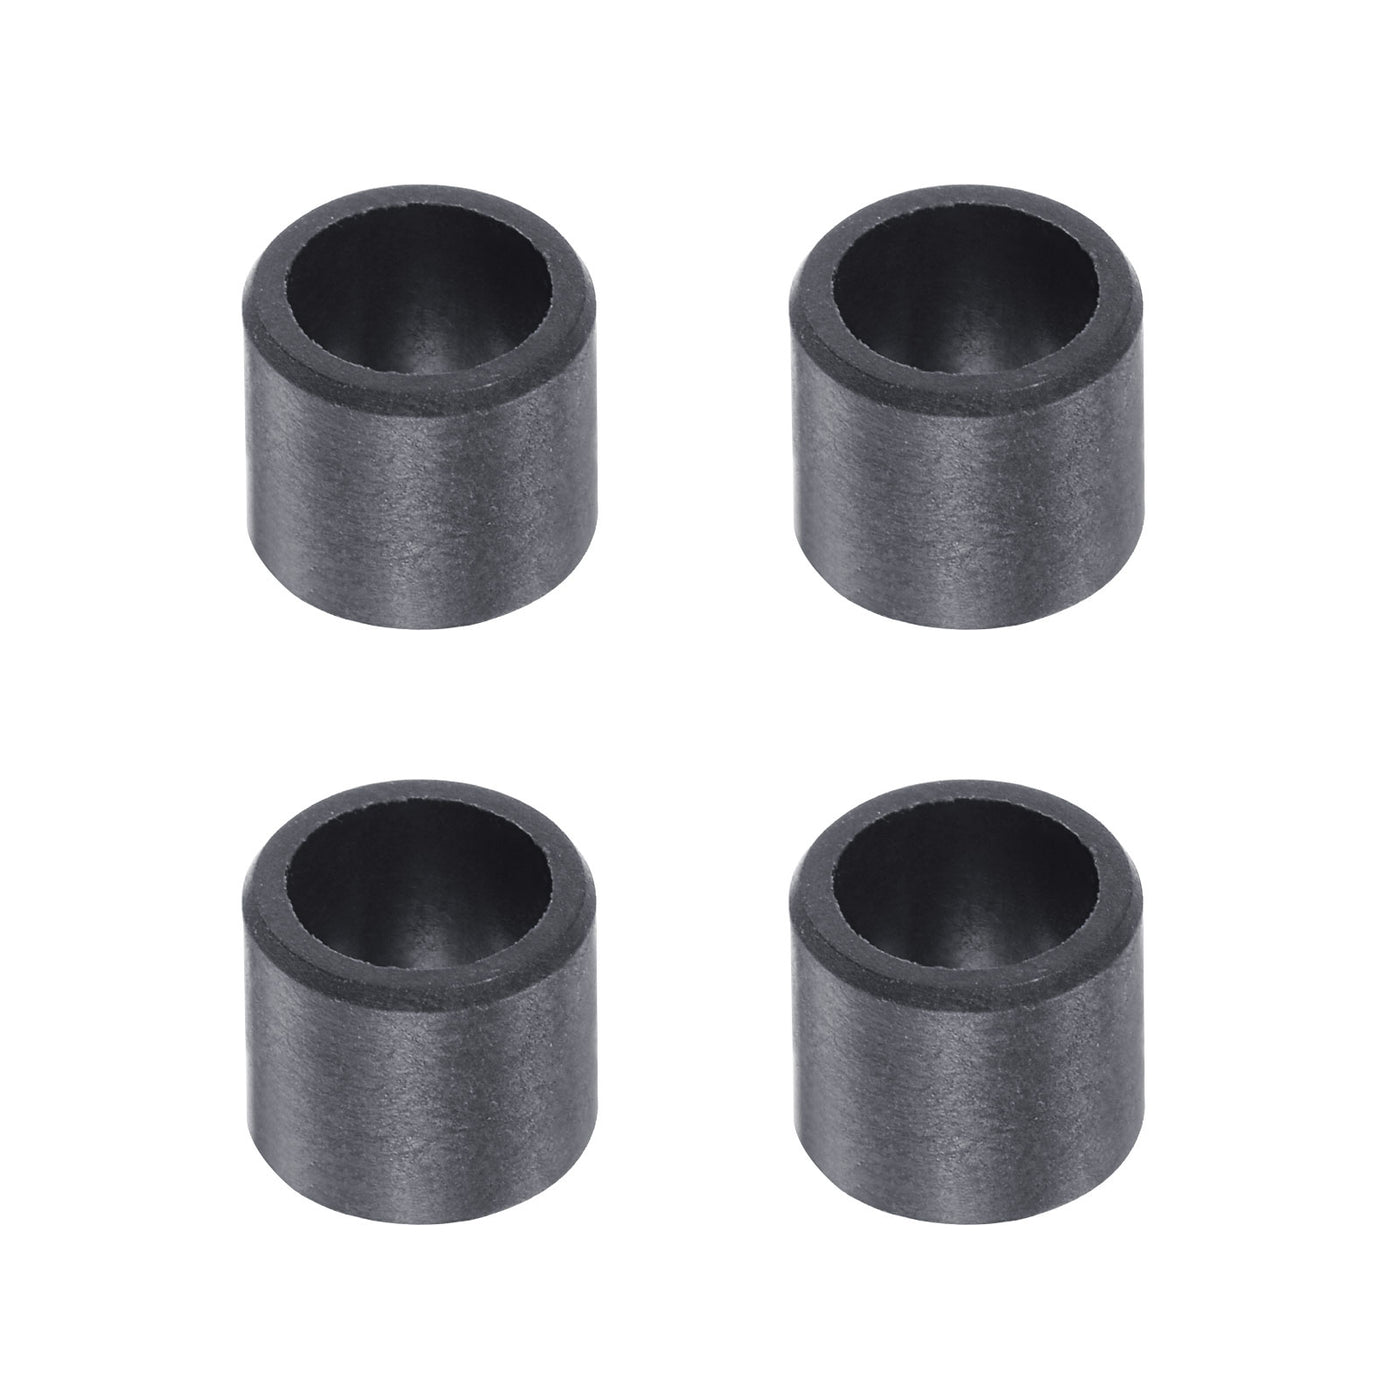 uxcell Uxcell Sleeve Bearings 6mmx8mmx6mm POM Wrapped Oilless Bushings Black 4pcs